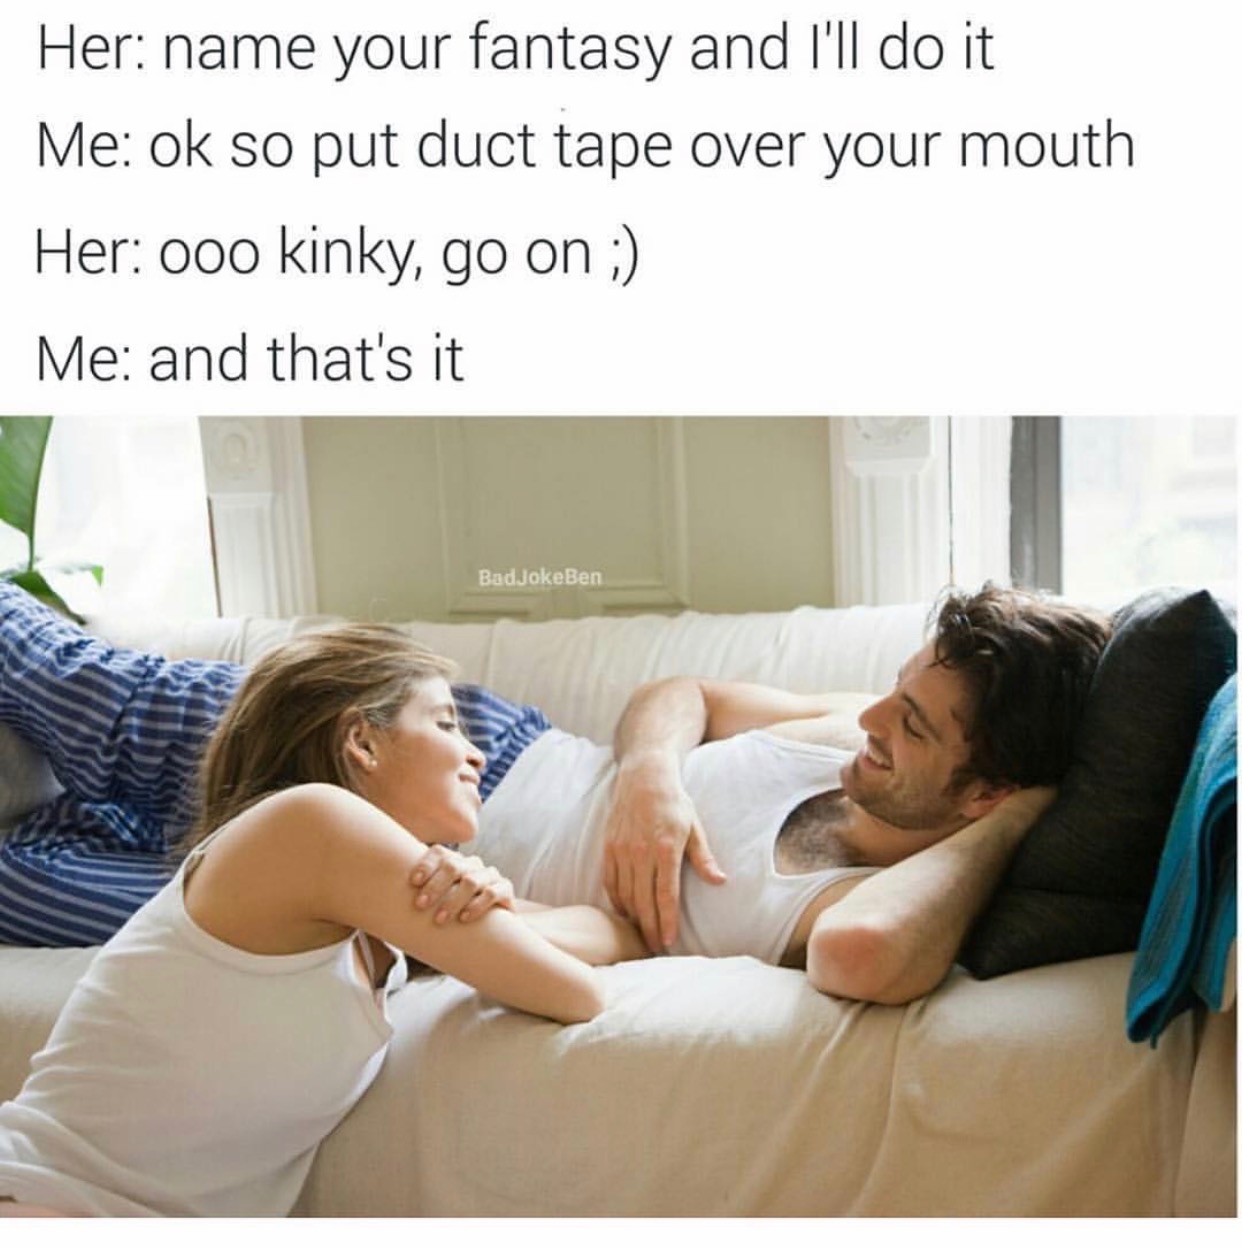 Meme - Her name your fantasy and I'll do it Me ok so put duct tape over your mouth Her 000 kinky, go on Me and that's it Bad JokeBen